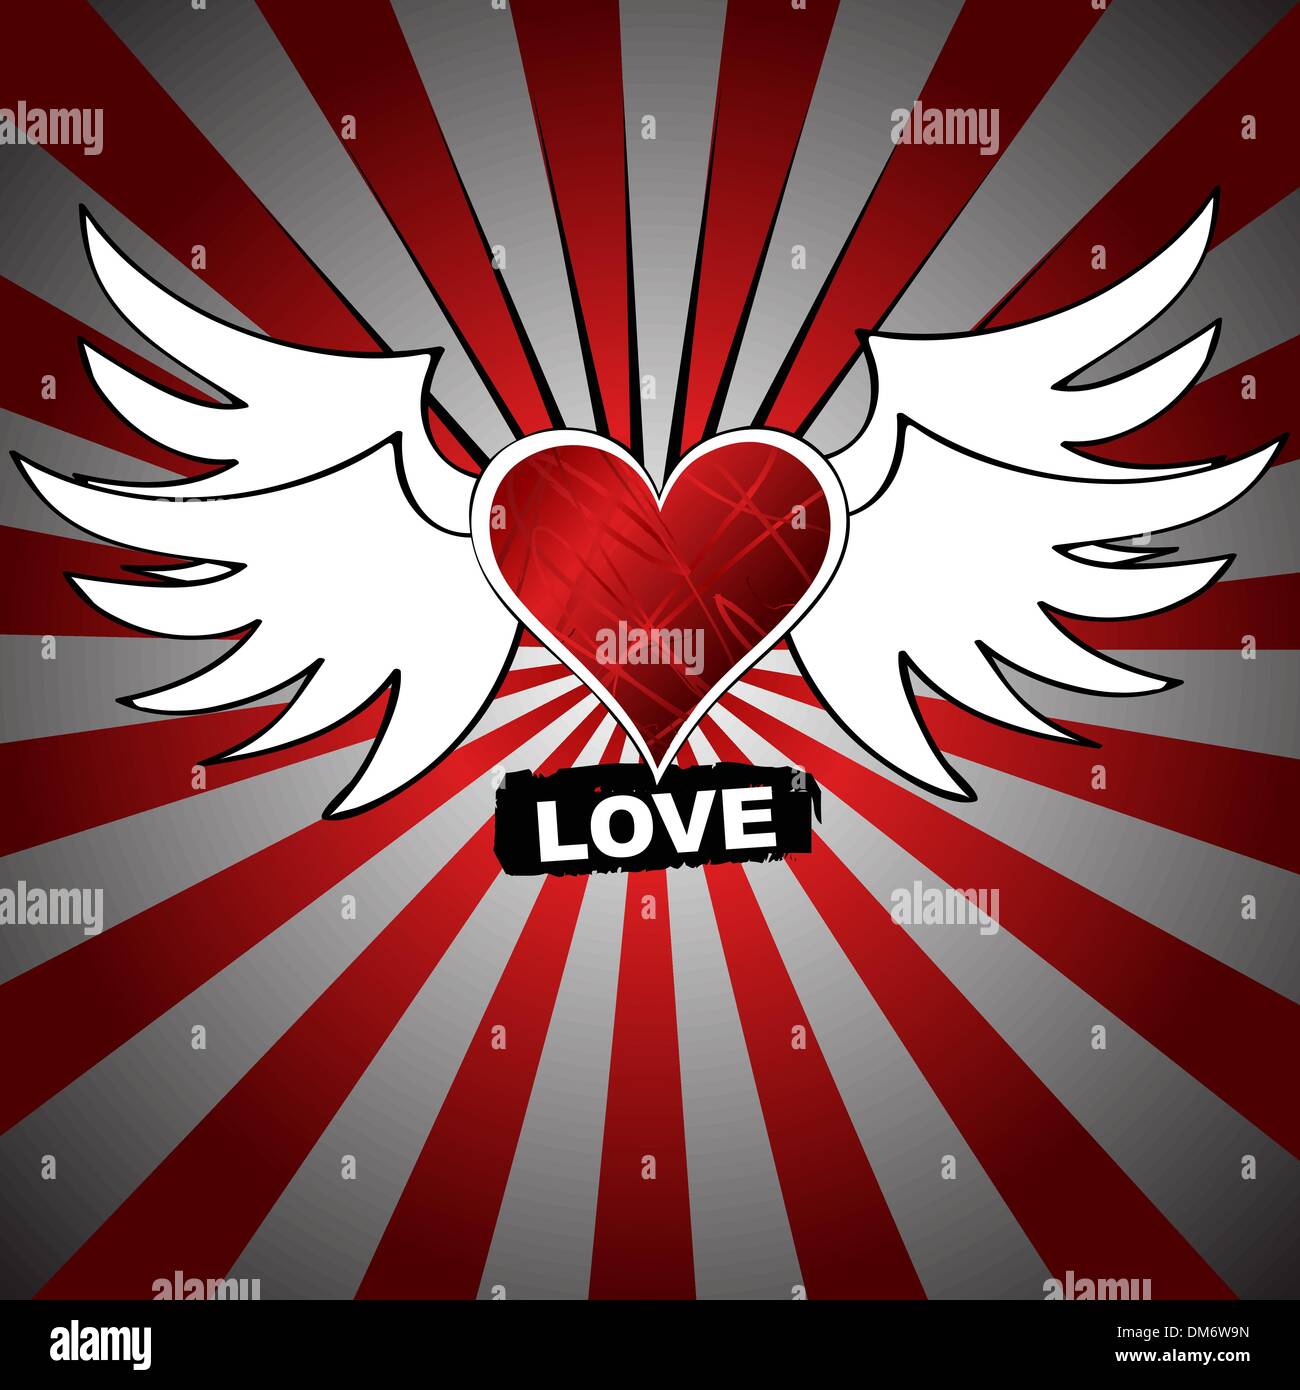 Love with wings Stock Vector